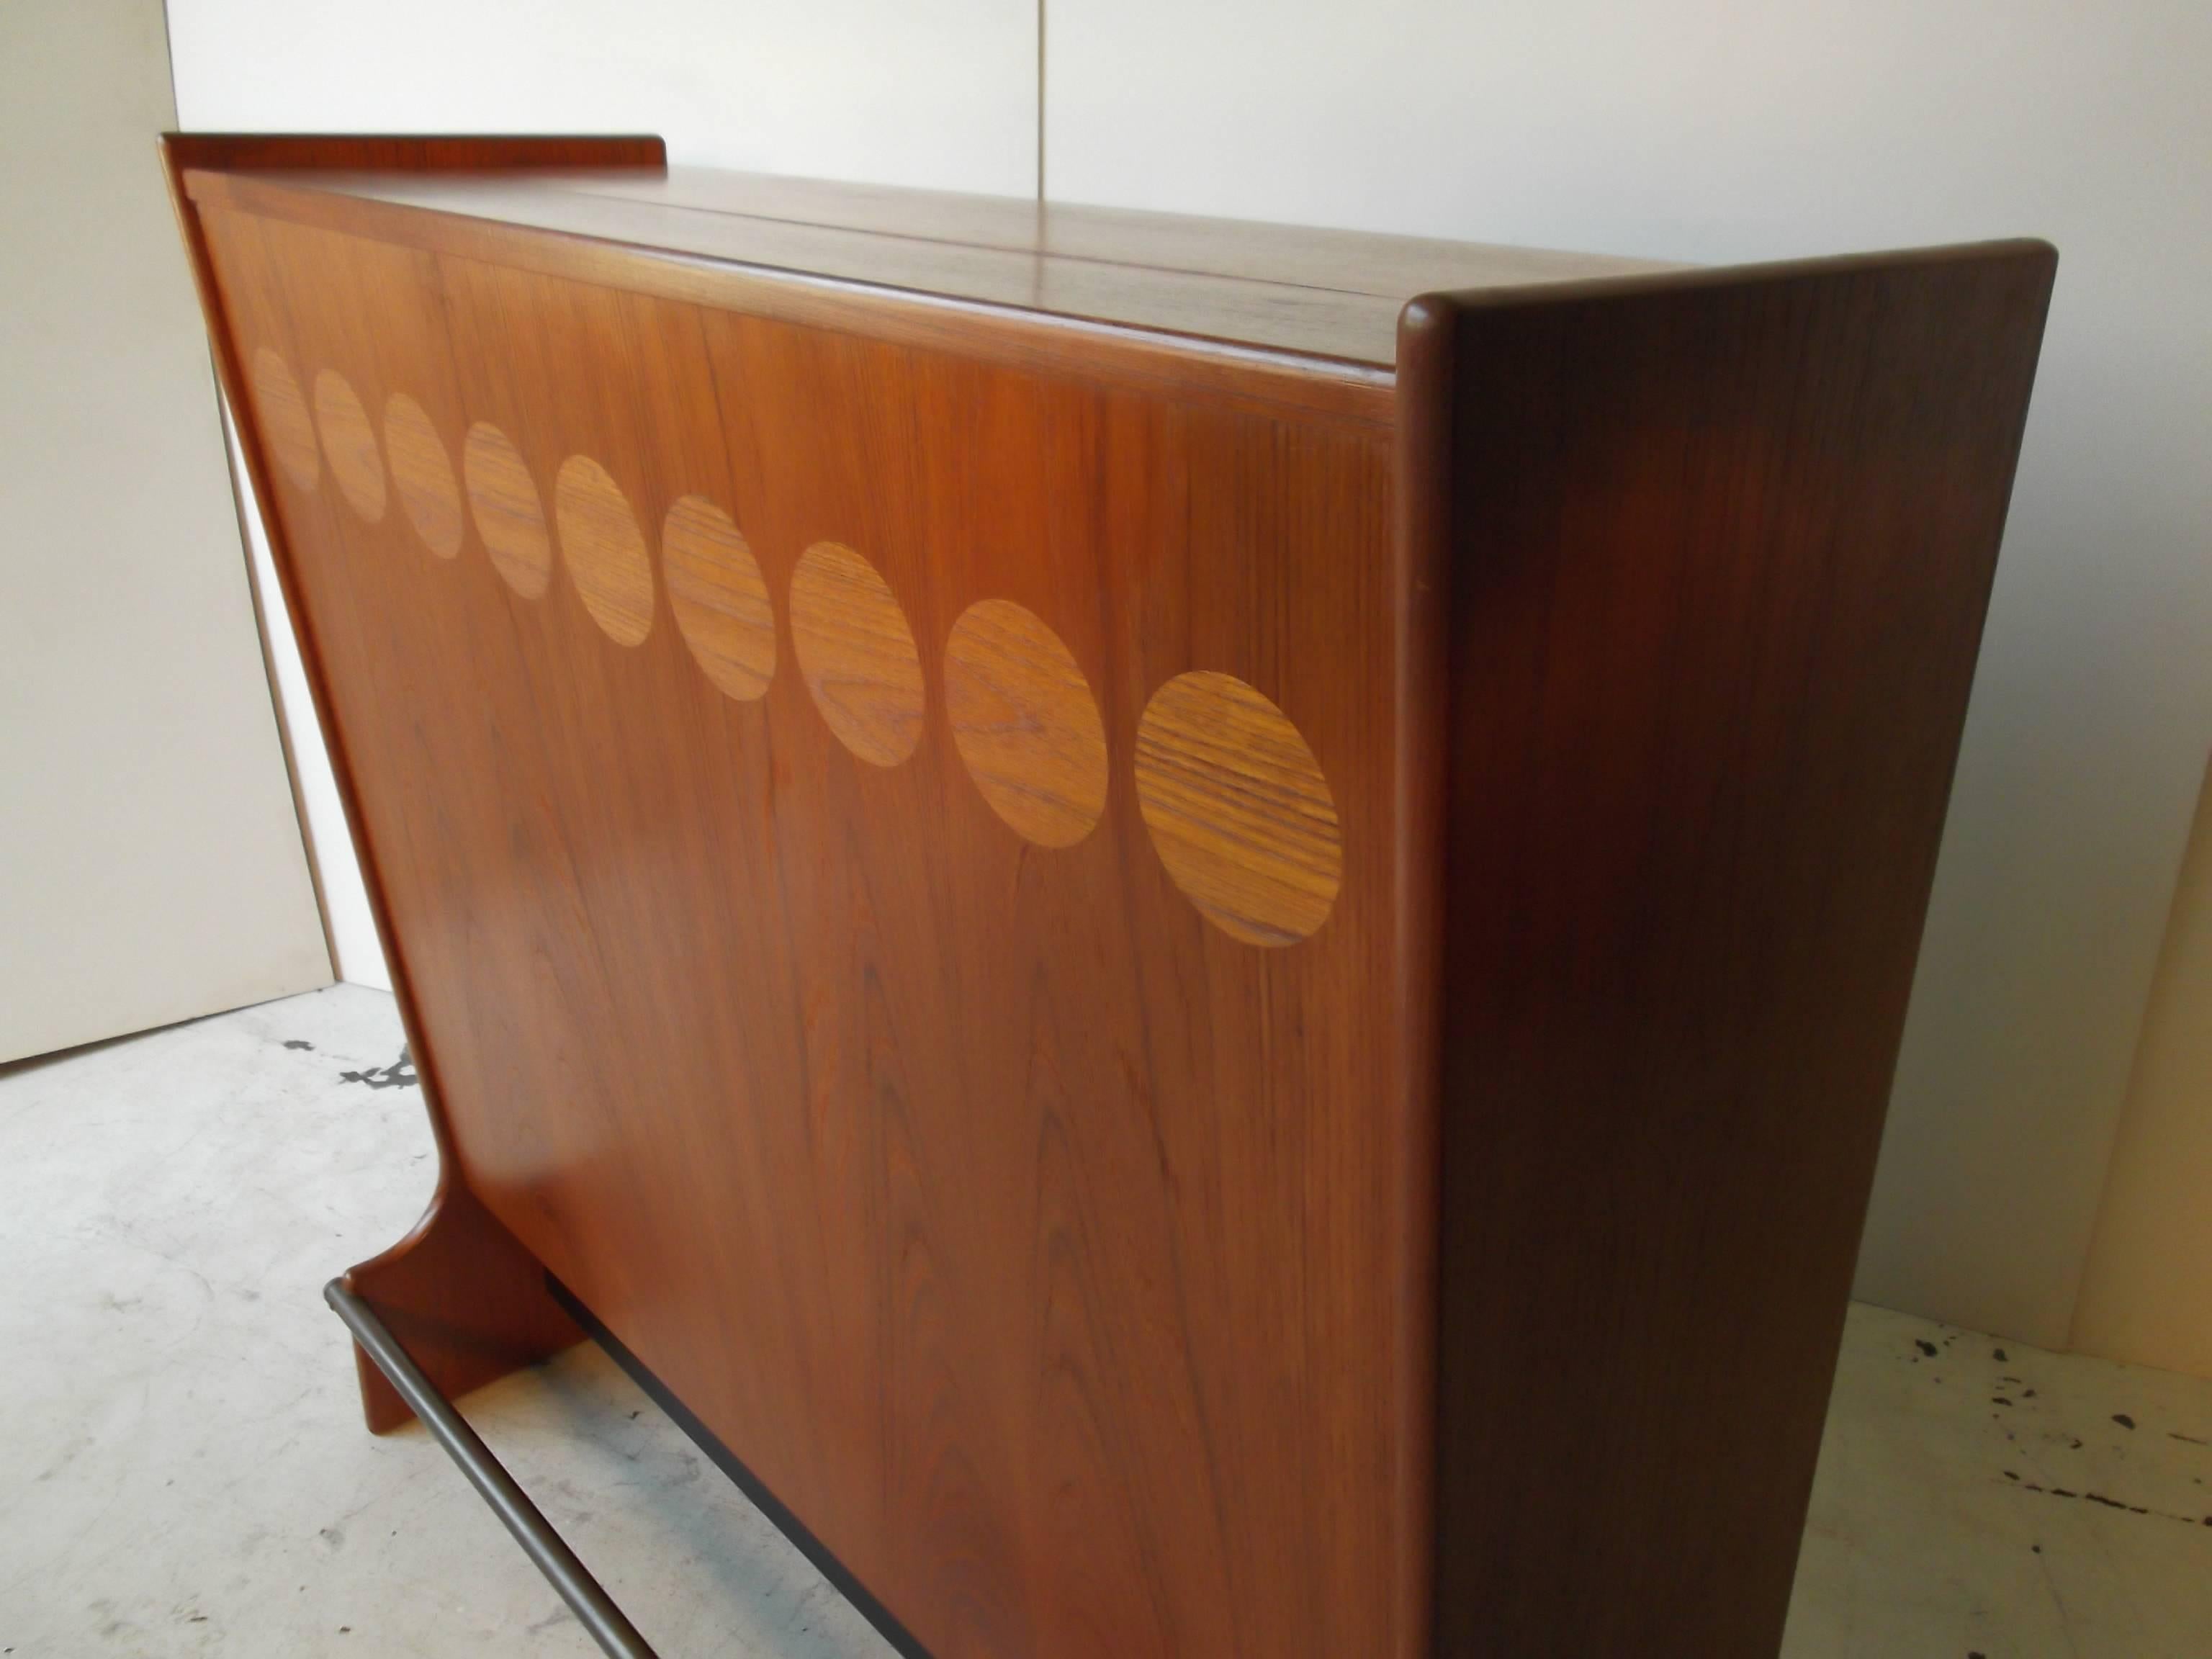 This bar is amazing, with inlaid contrasting grain circles to the front and the back too. It is freestanding. It retains orig. Danish Labels, with Johannes Anderson, for Skaaning Mobler. There is a brass footrest across front. This piece is very